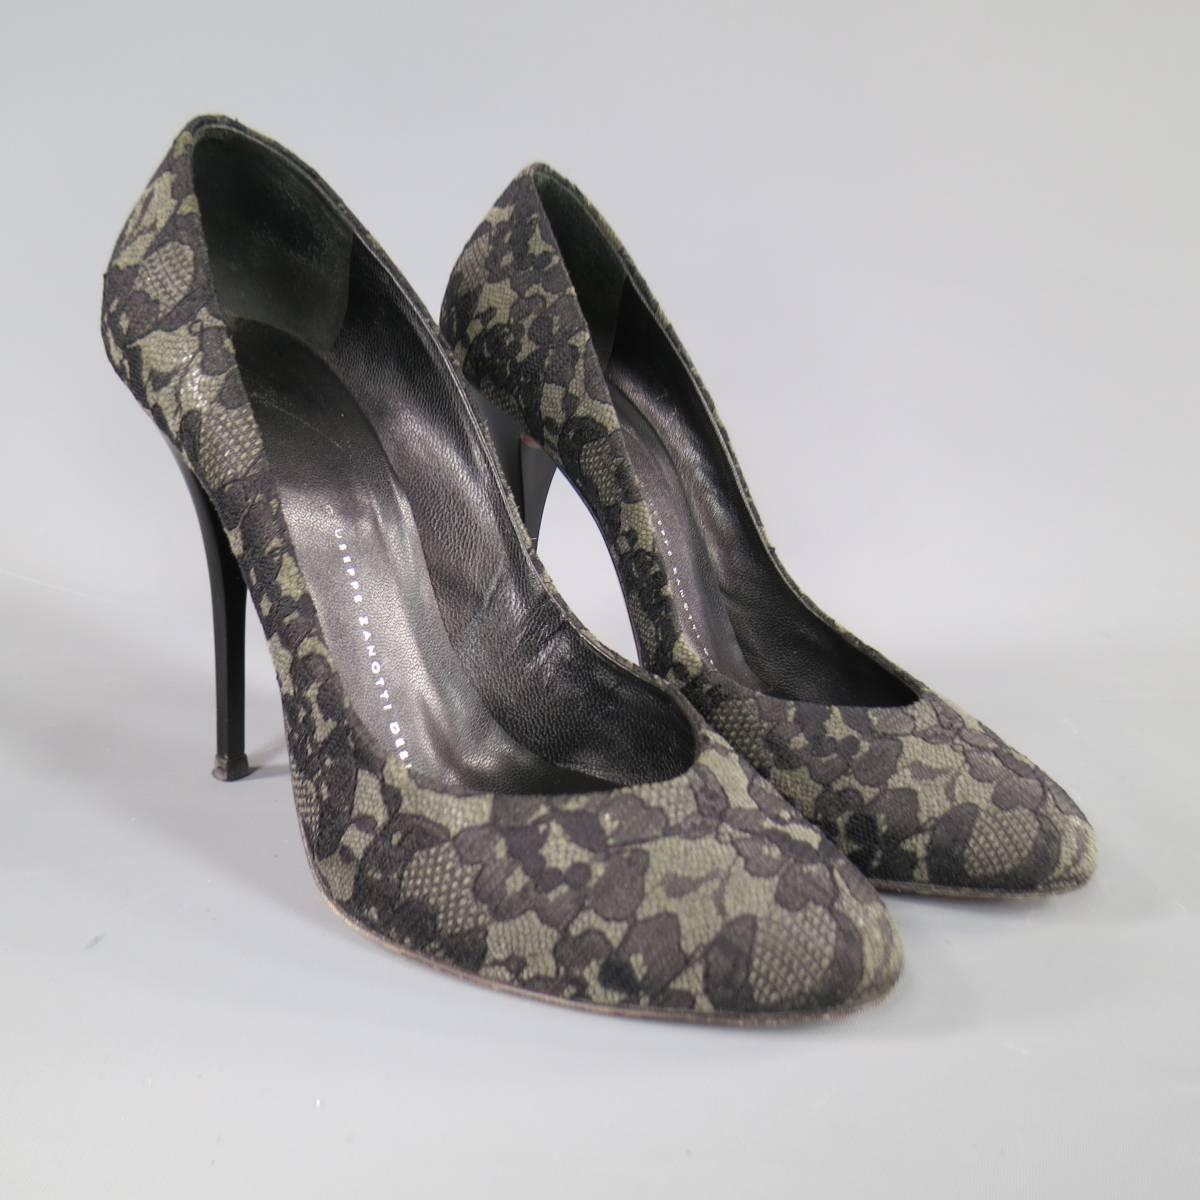 These sexy GIUSEPPE ZANOTTI pumps come in charcoal grey with black lace overlay with a high matte lacquered stiletto heel. Made in Italy.
 
Very Good Pre-Owned Condition.
Marked: 37.5
 
Measurements:
 
Heel: 3 in.
Width:  4.5 in.
